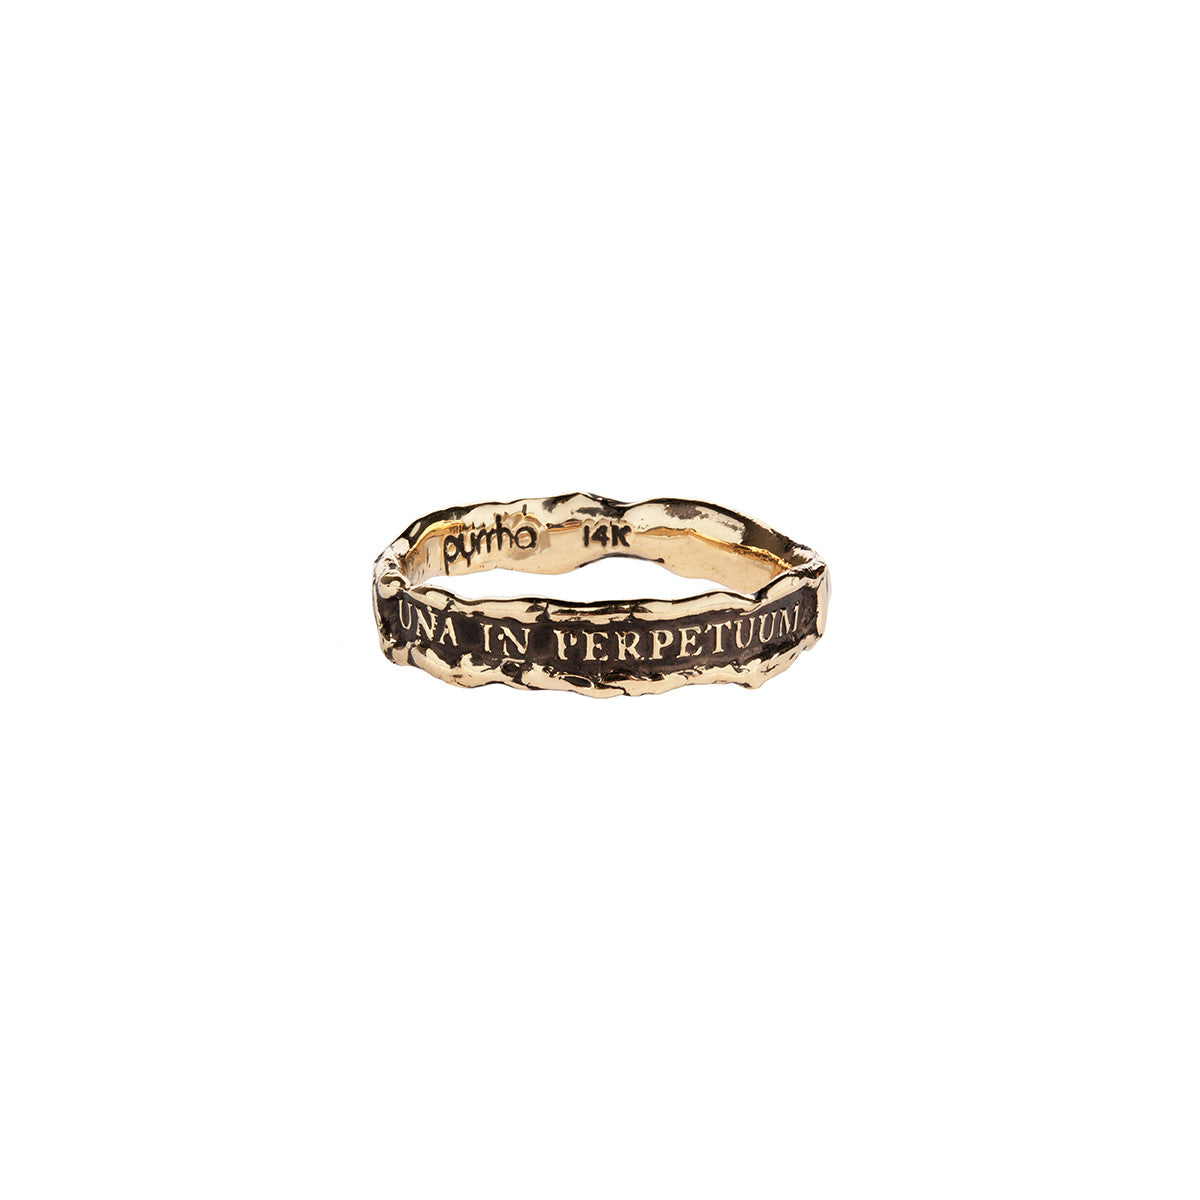 Together Forever Narrow 14K Gold Textured Band Ring